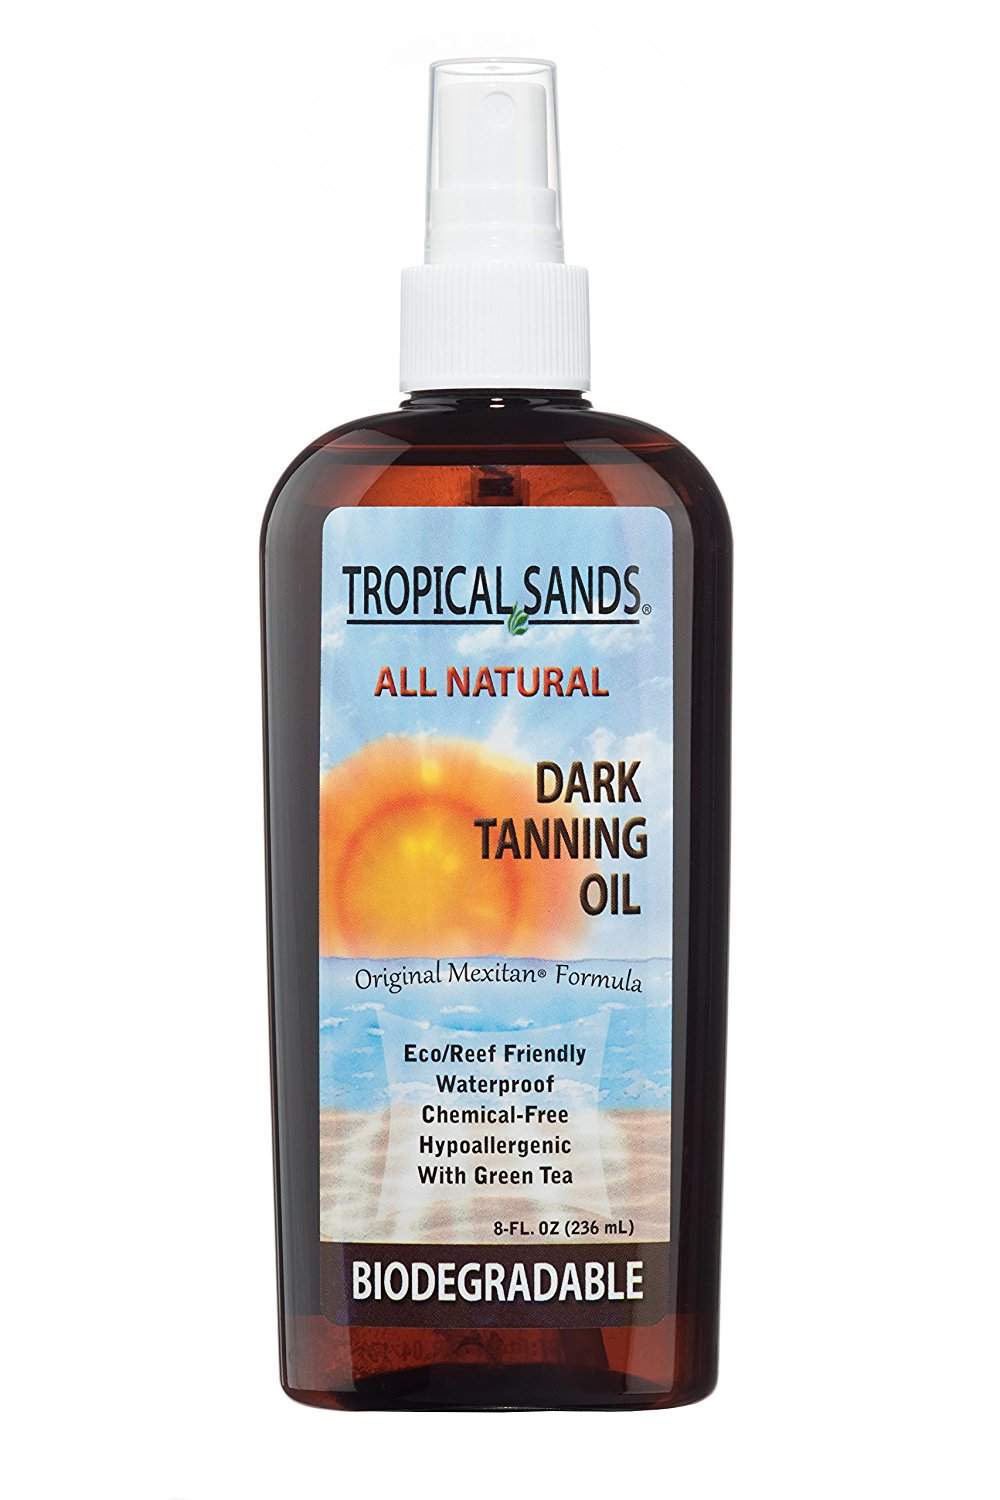 Tropical Sands All Natural Dark Tanning Oil